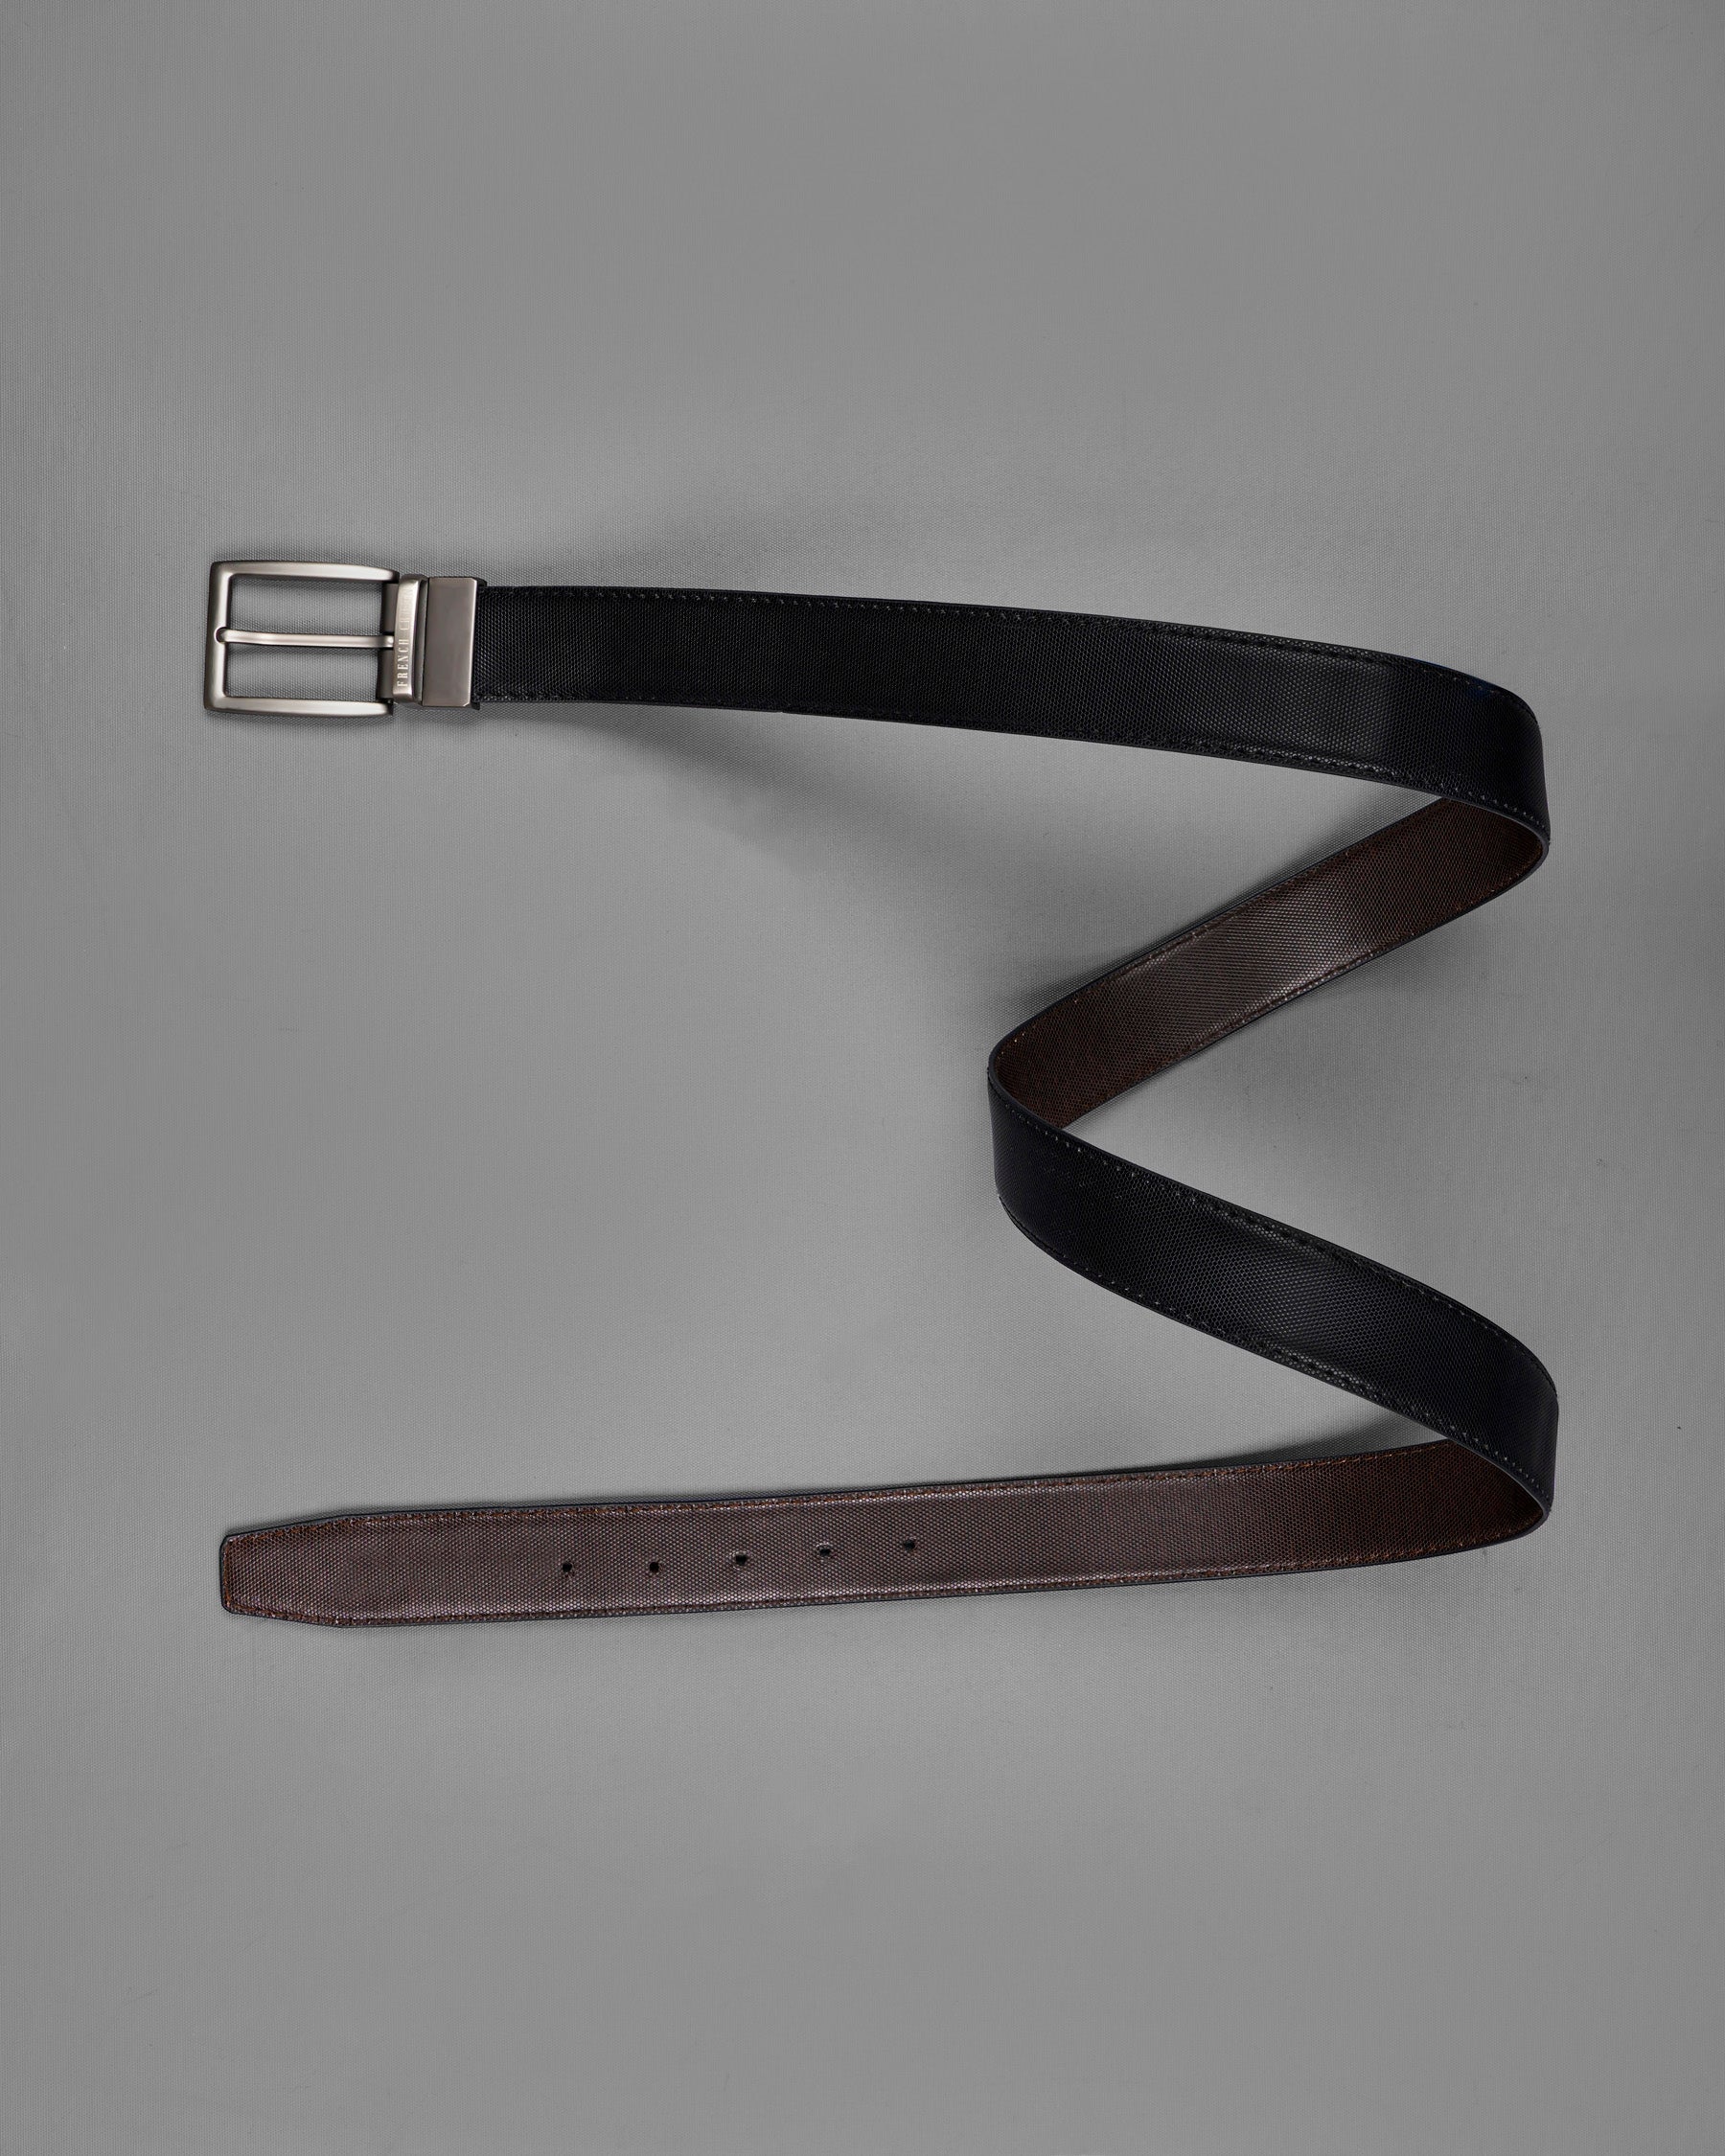 Silver Buckle with Jade Black and Brown Leather Free Handcrafted Reversible Belt